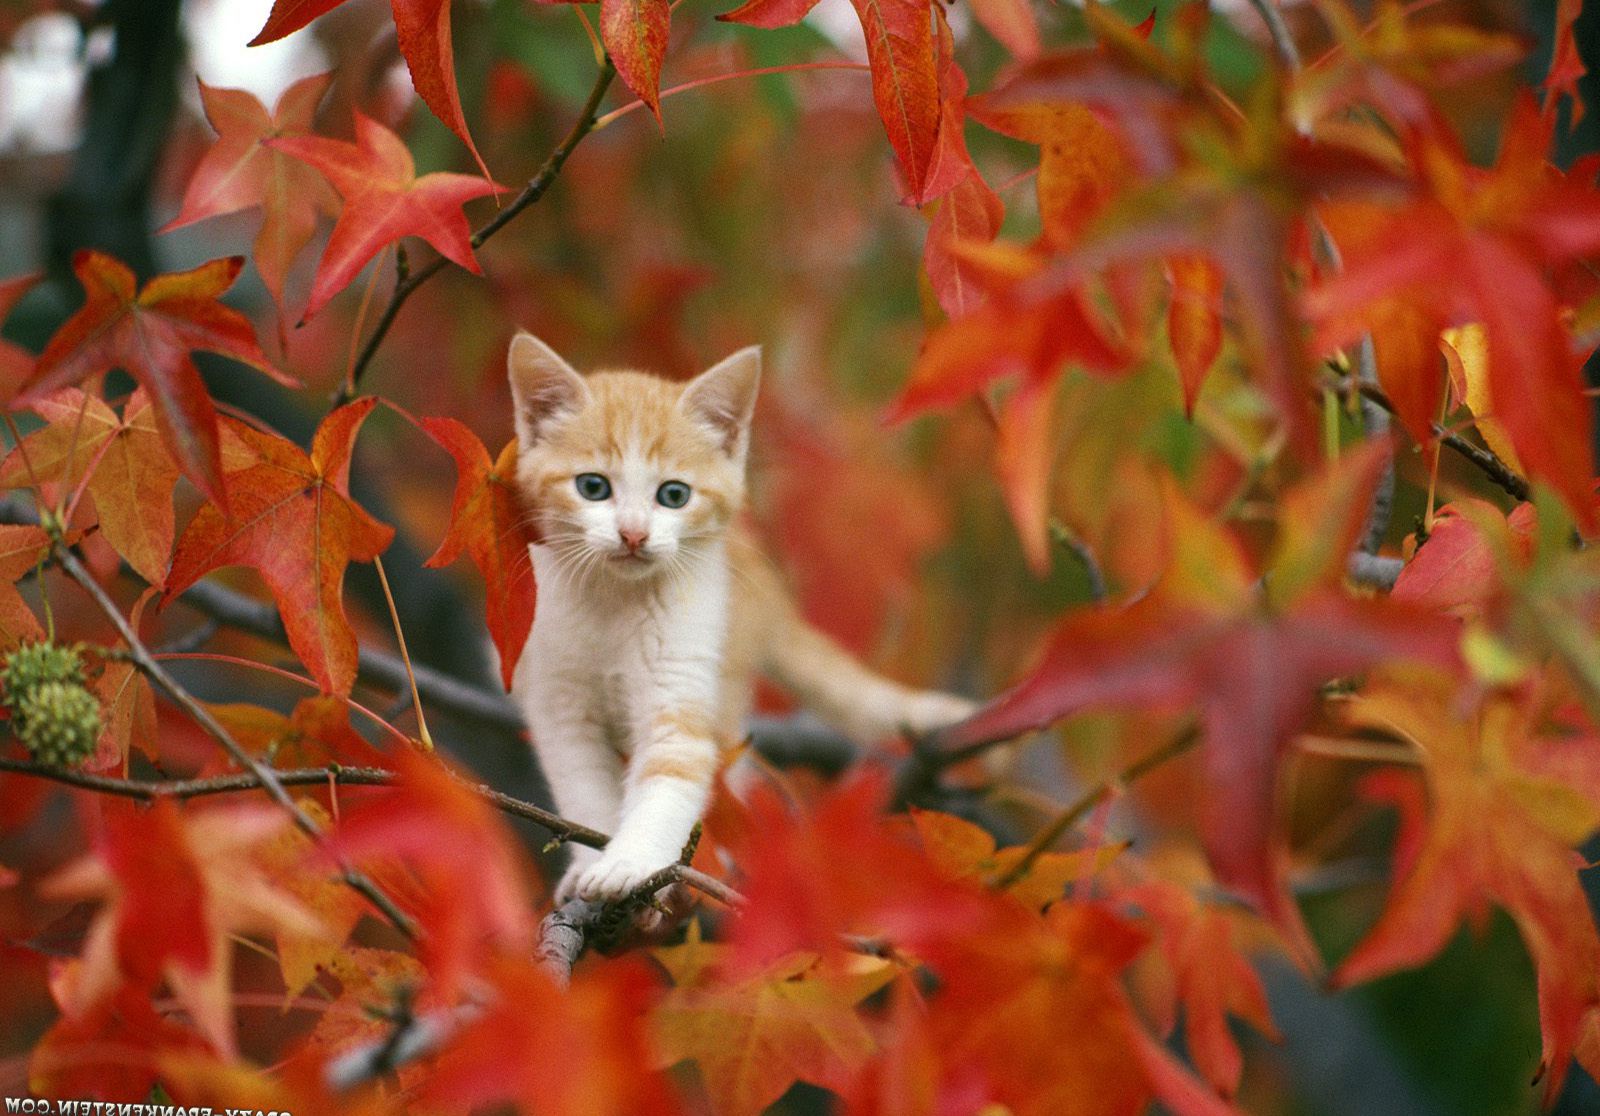 Wallpaper, branch, wildlife, kittens, whiskers, spring, autumn, kitten, computer wallpaper, cat like mammal, small to medium sized cats, maple leaf, puss, 1600x1116 px, lovely desktop image, cat image, cat photo, cat